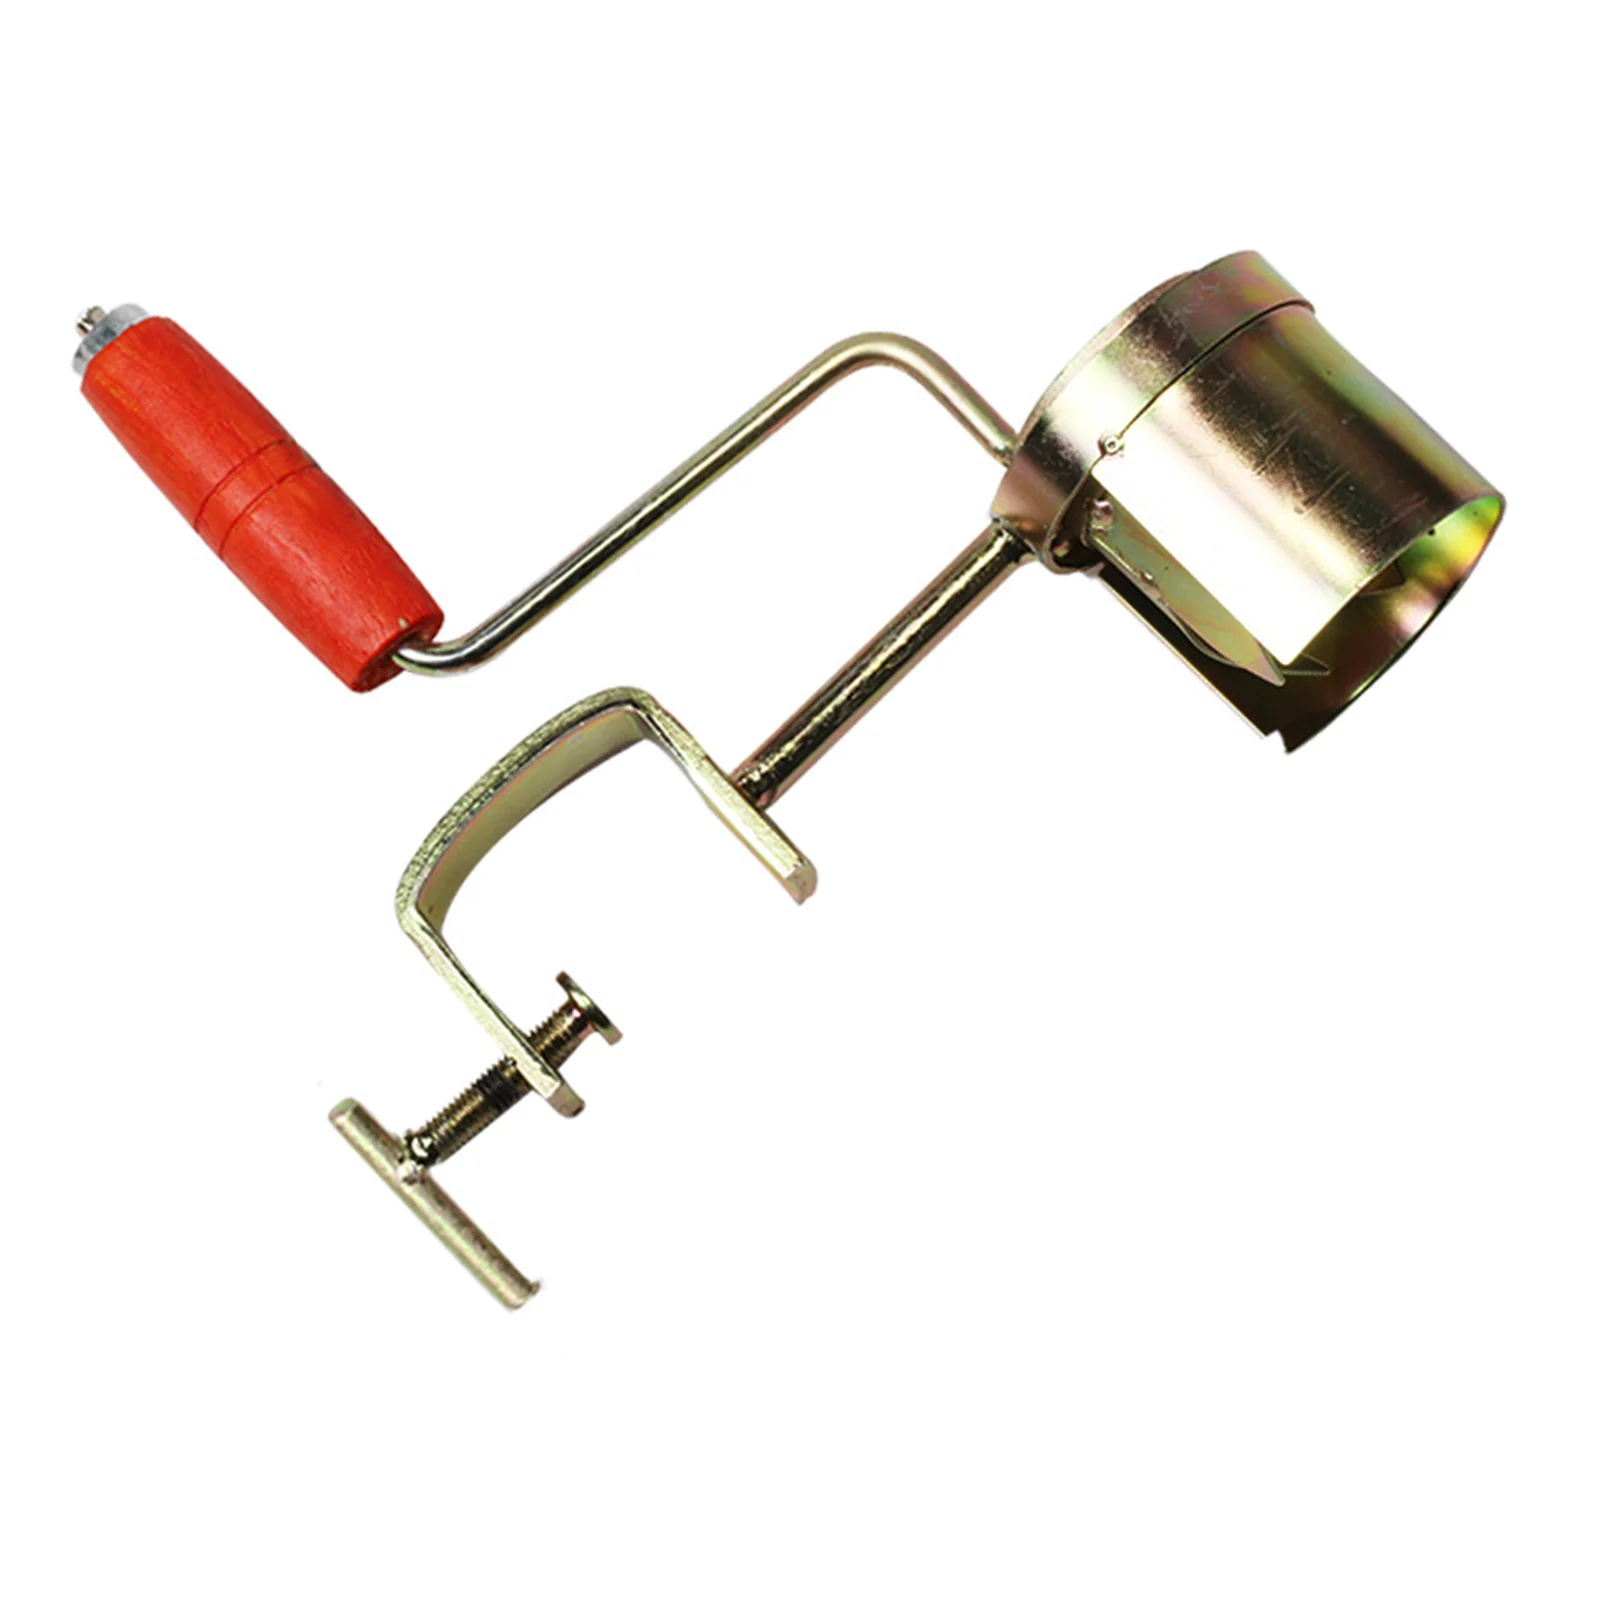 

Hand Planer Dry Corn Separator Easy One Step Rapid Stripping Kerneler Cut Peel Thresher Device For Kitchen Tool Accessories